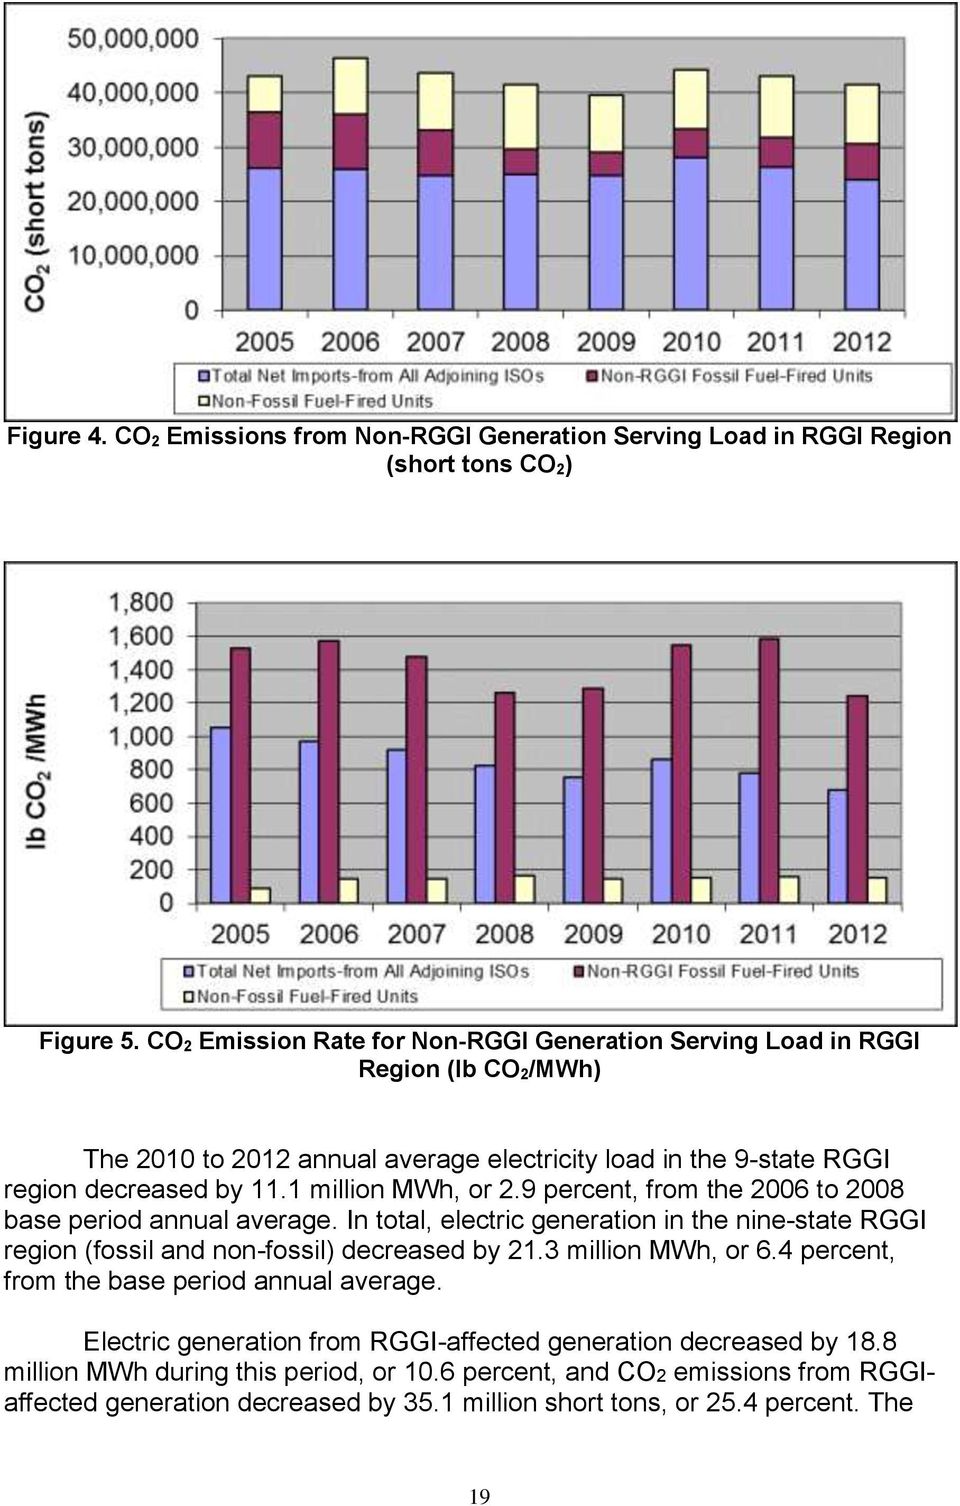 1 million, or 2.9 percent, from the 2006 to 2008 base period annual average. In total, electric generation in the nine-state RGGI region (fossil and non-fossil) decreased by 21.